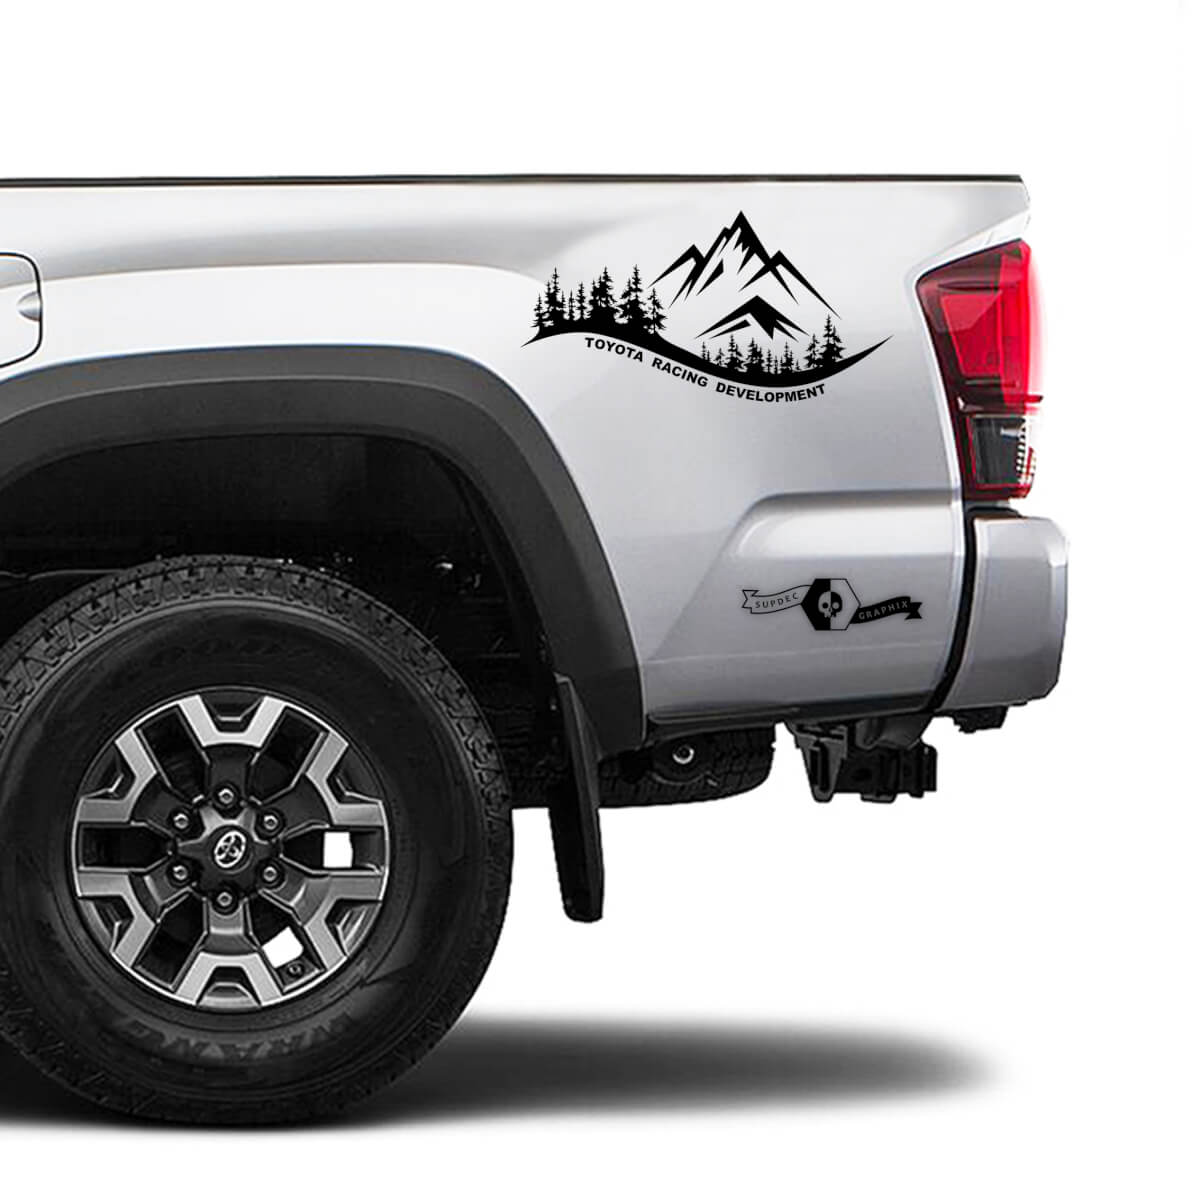 TRD TOYOTA Mountain Forest Decals Stickers for Tacoma Tundra 4Runner Hilux side